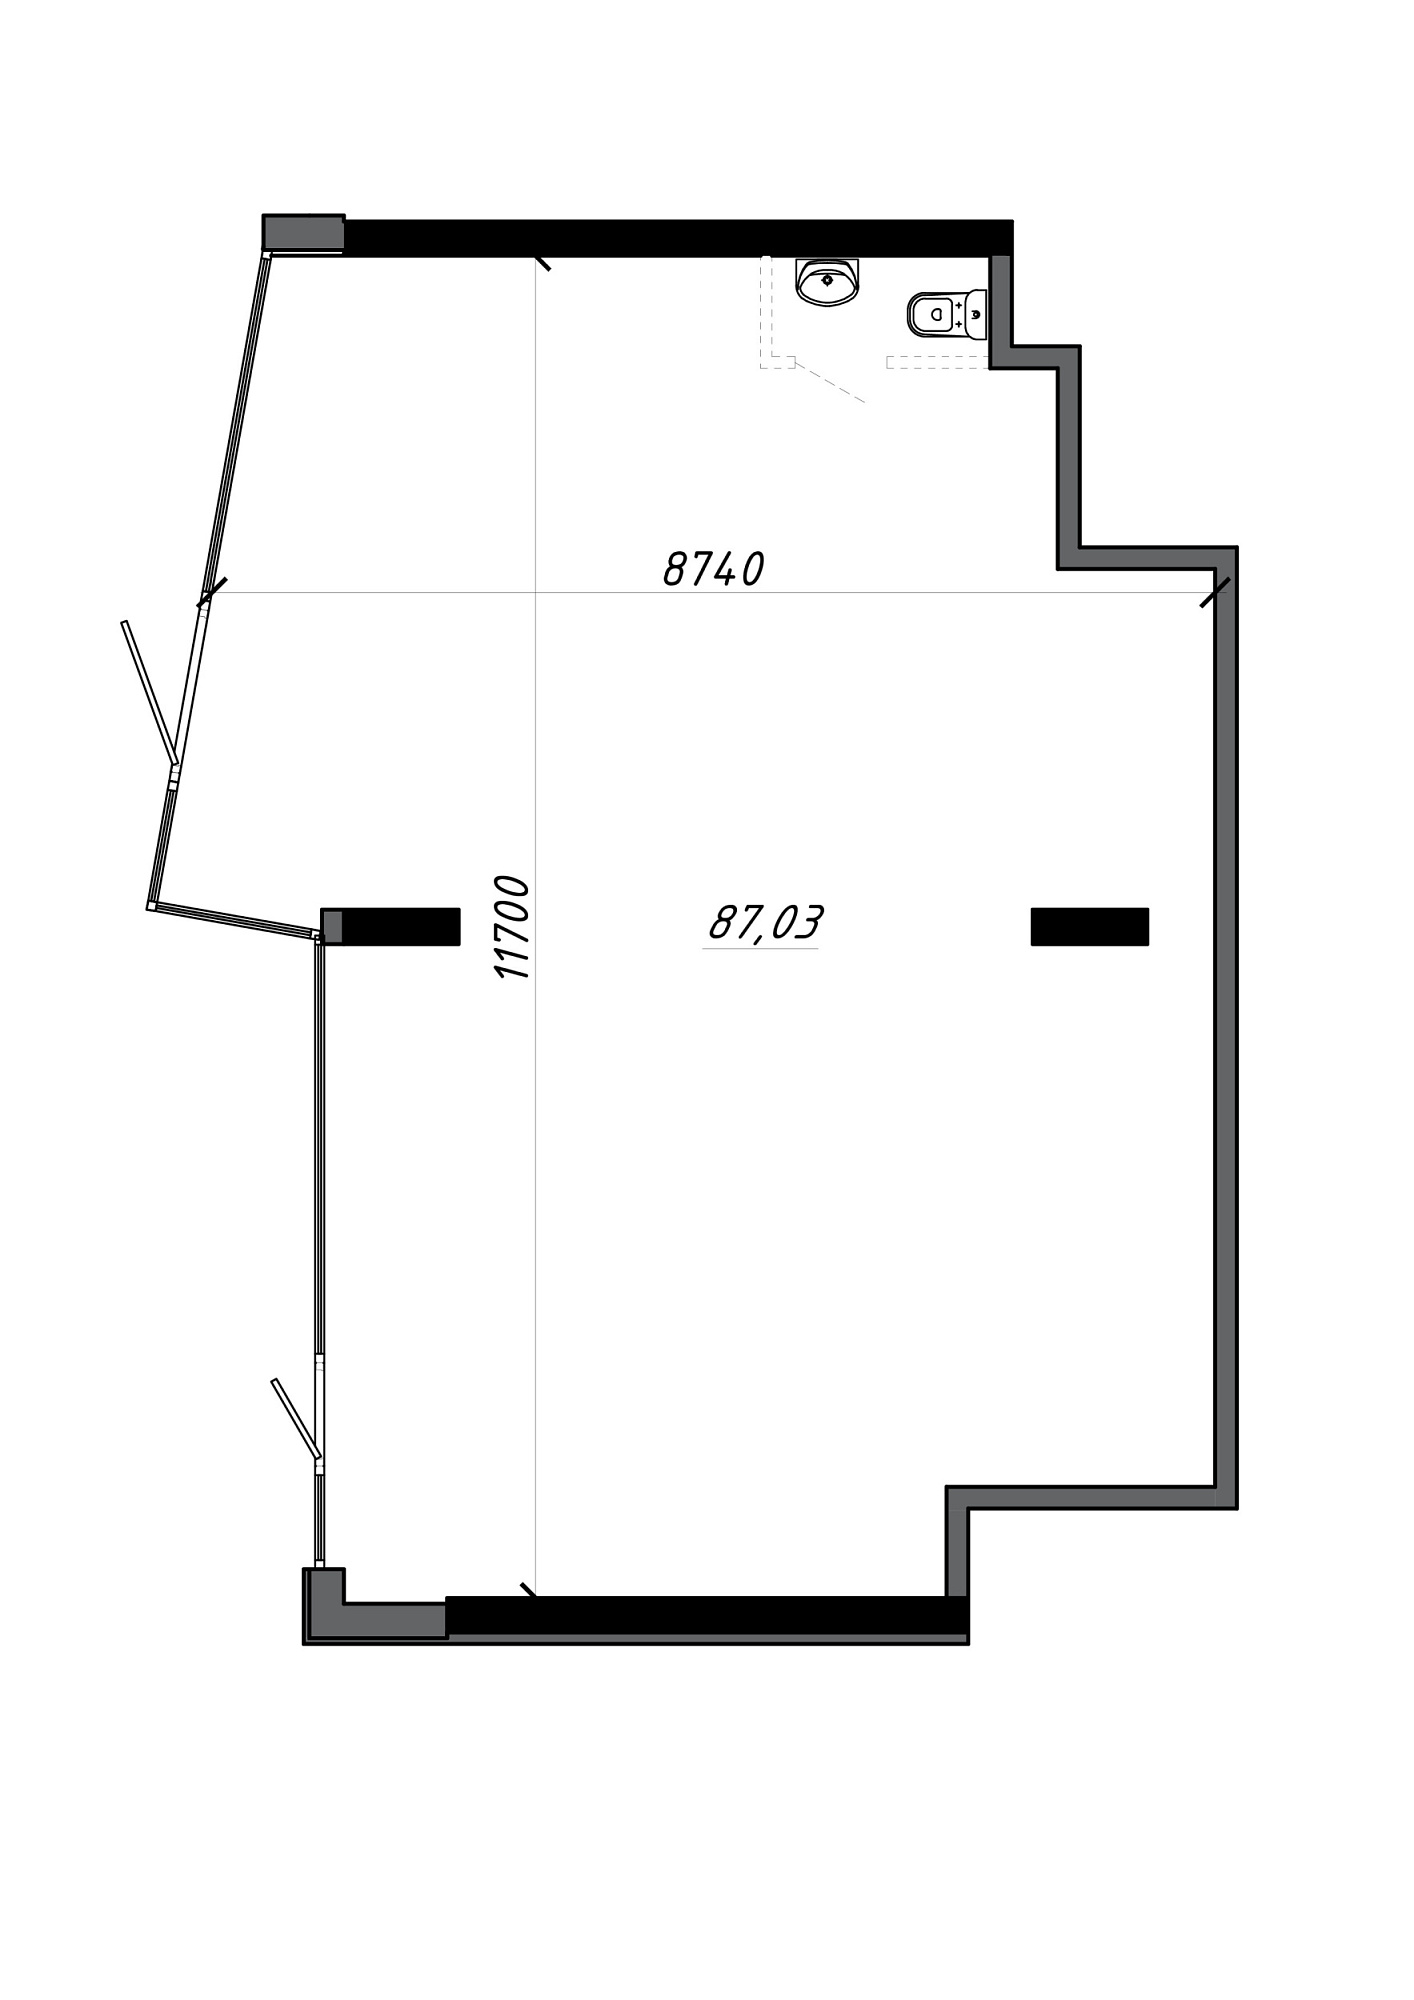 Planning Commercial premises area 284.14m2, AB-21-м1/Т0002.